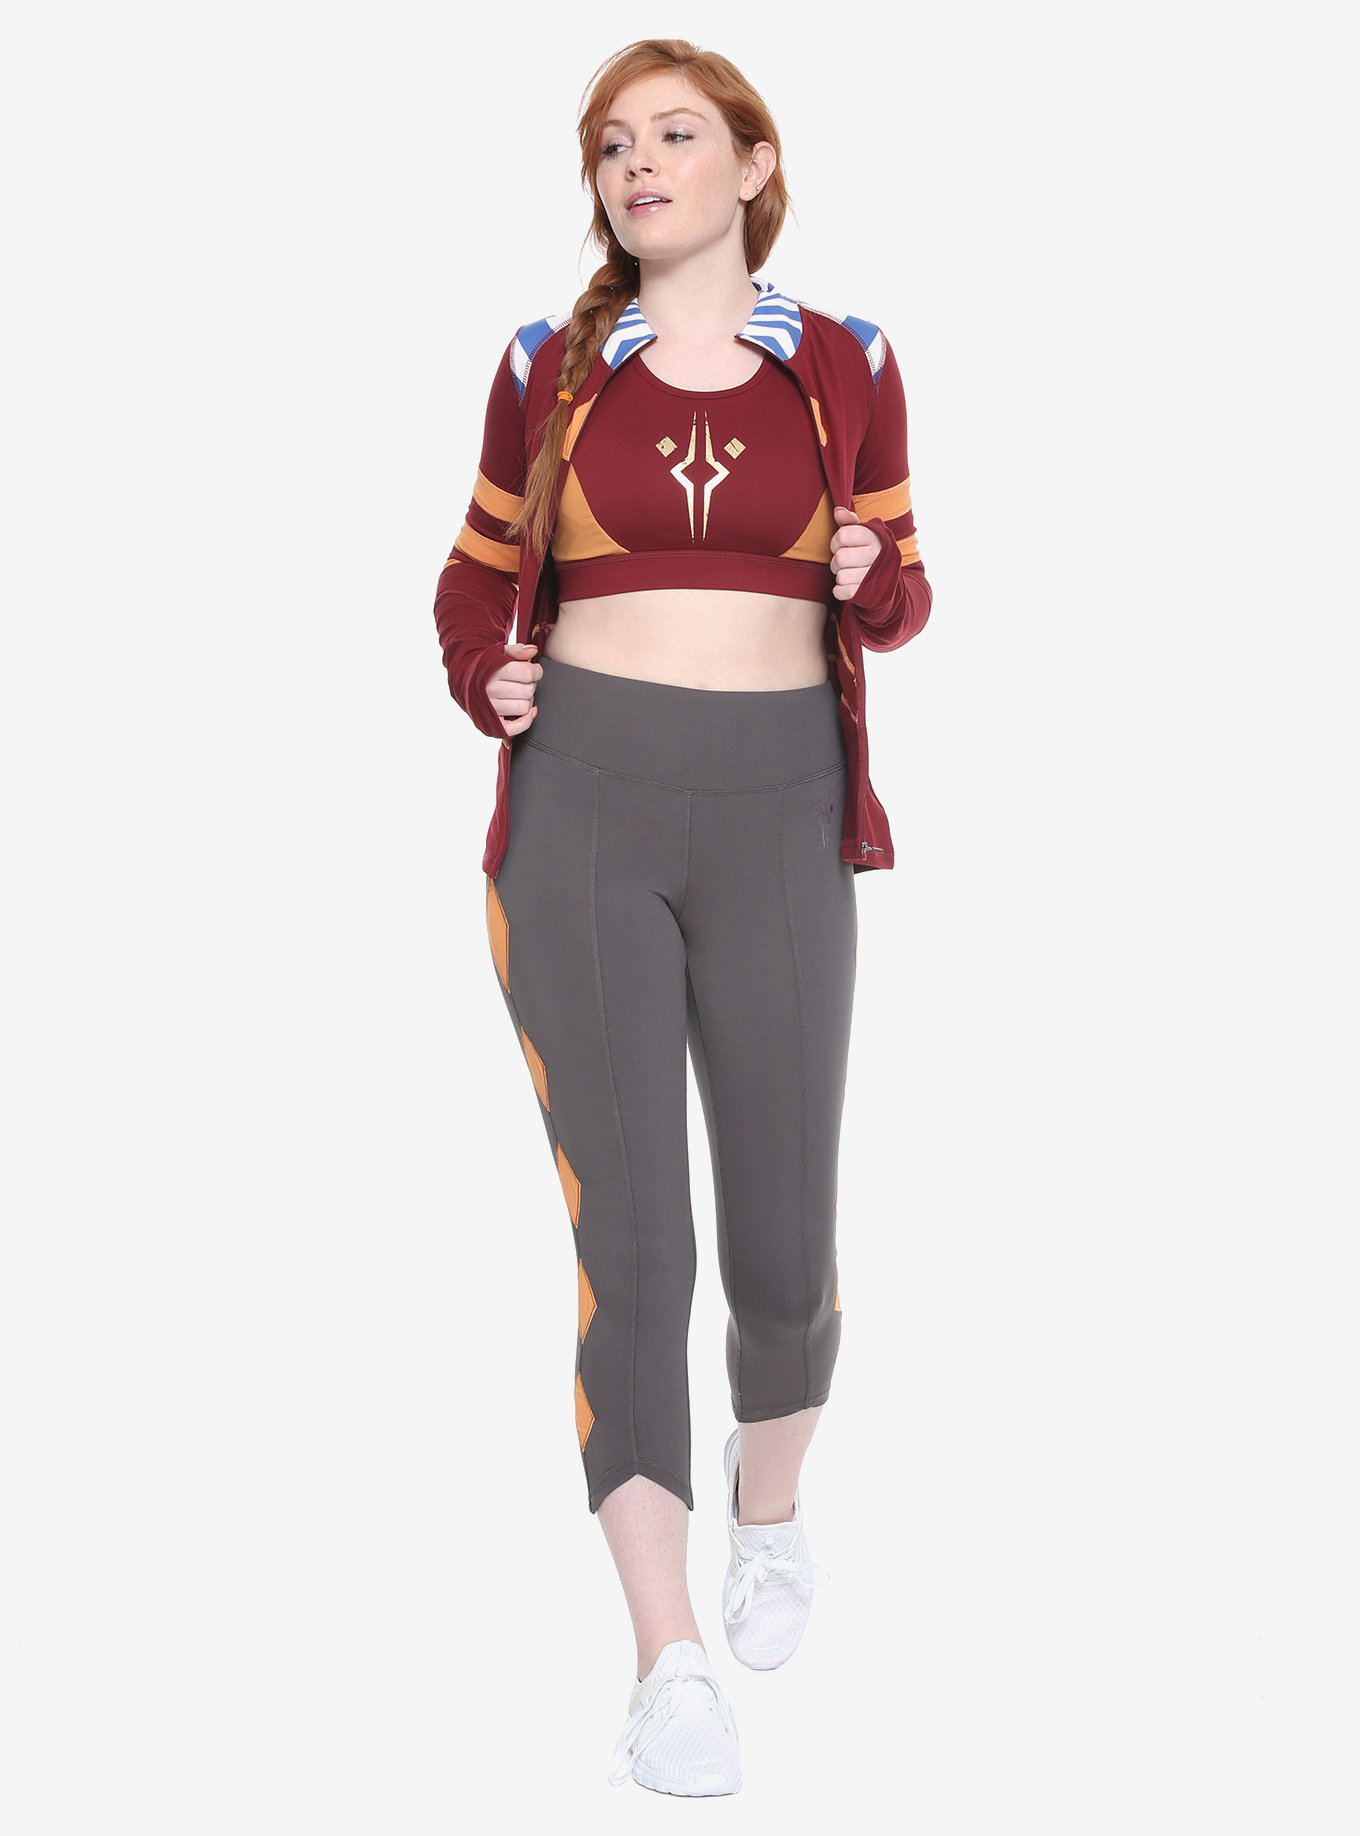 New Her Universe Ahsoka Tano Active Collection The Kessel Runway